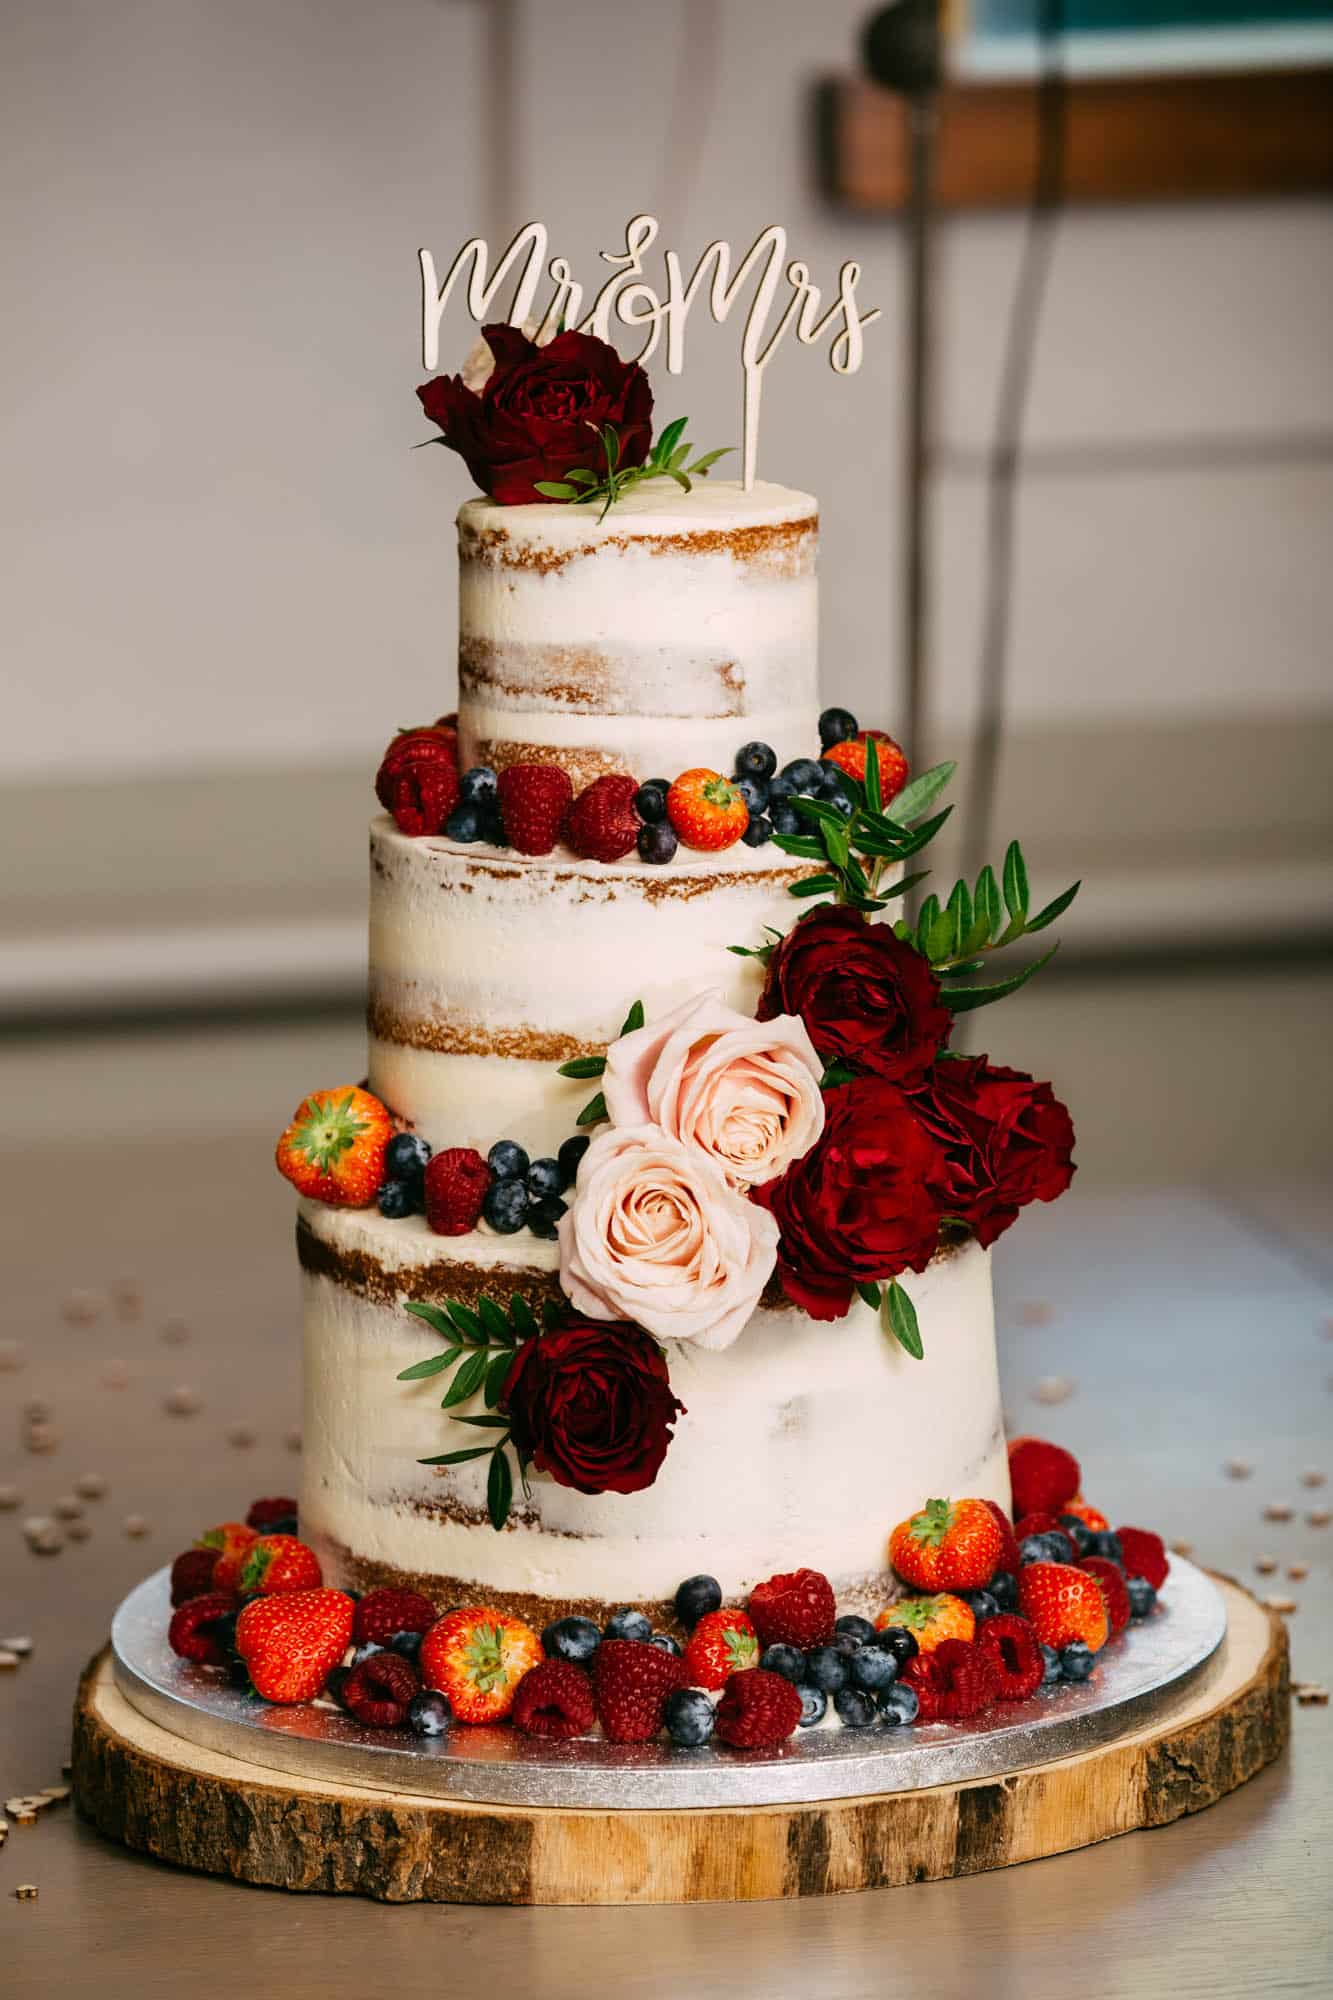 A wedding cake with berries and flowers on top.